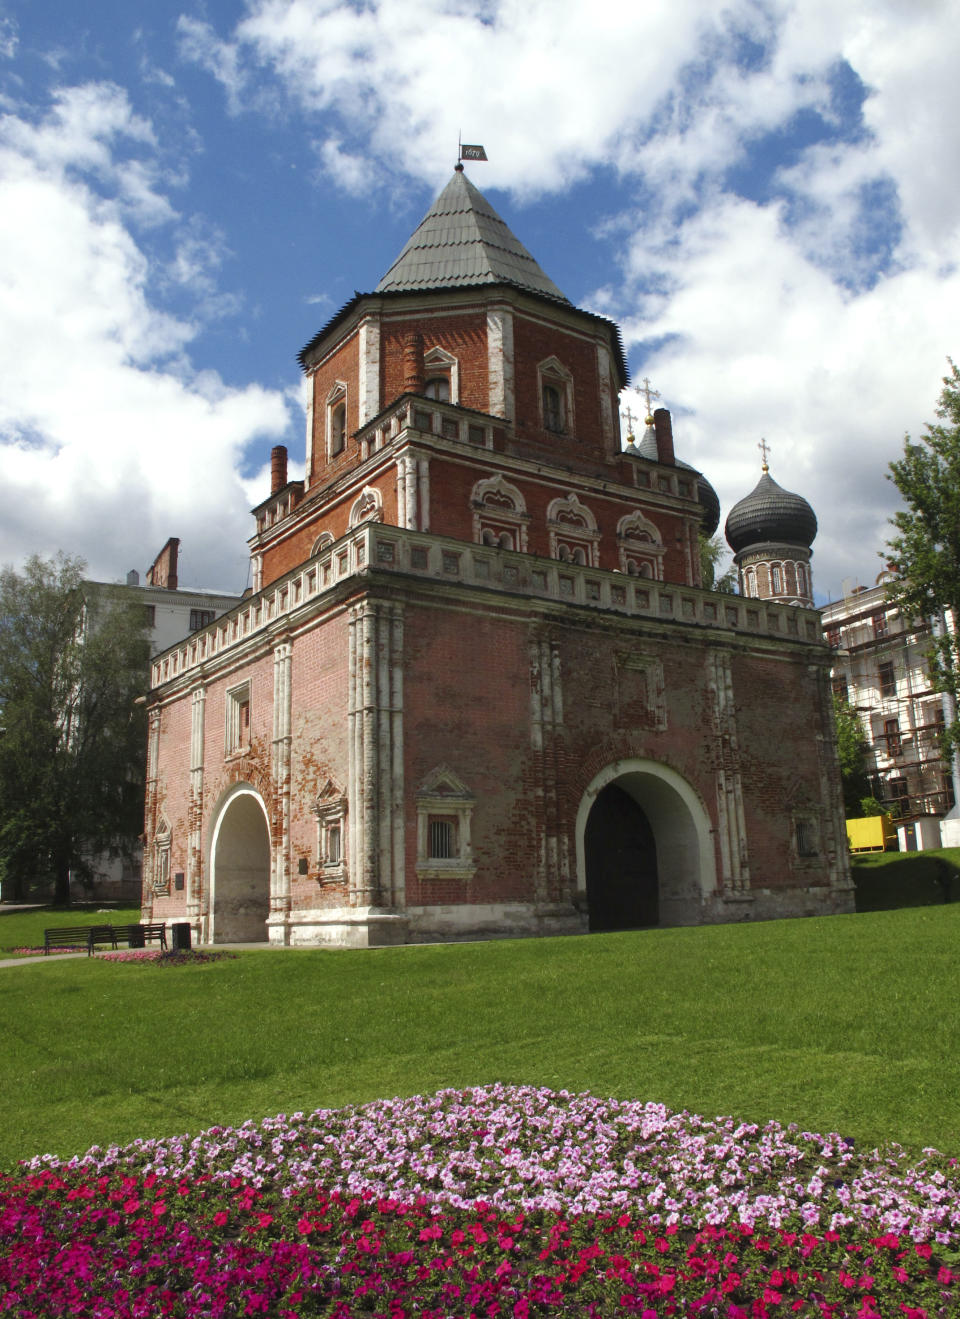 This June 4, 2012 photo shows the Mostovaya Bashnya tower which once housed archers guarding the approach to the Czar’s Country Estate on Silver Island in northern Moscow. The estate, where the boy who became Peter the Great learned to sail, is a free attraction but rarely visited by tourists. (AP Photo/Jim Heintz).